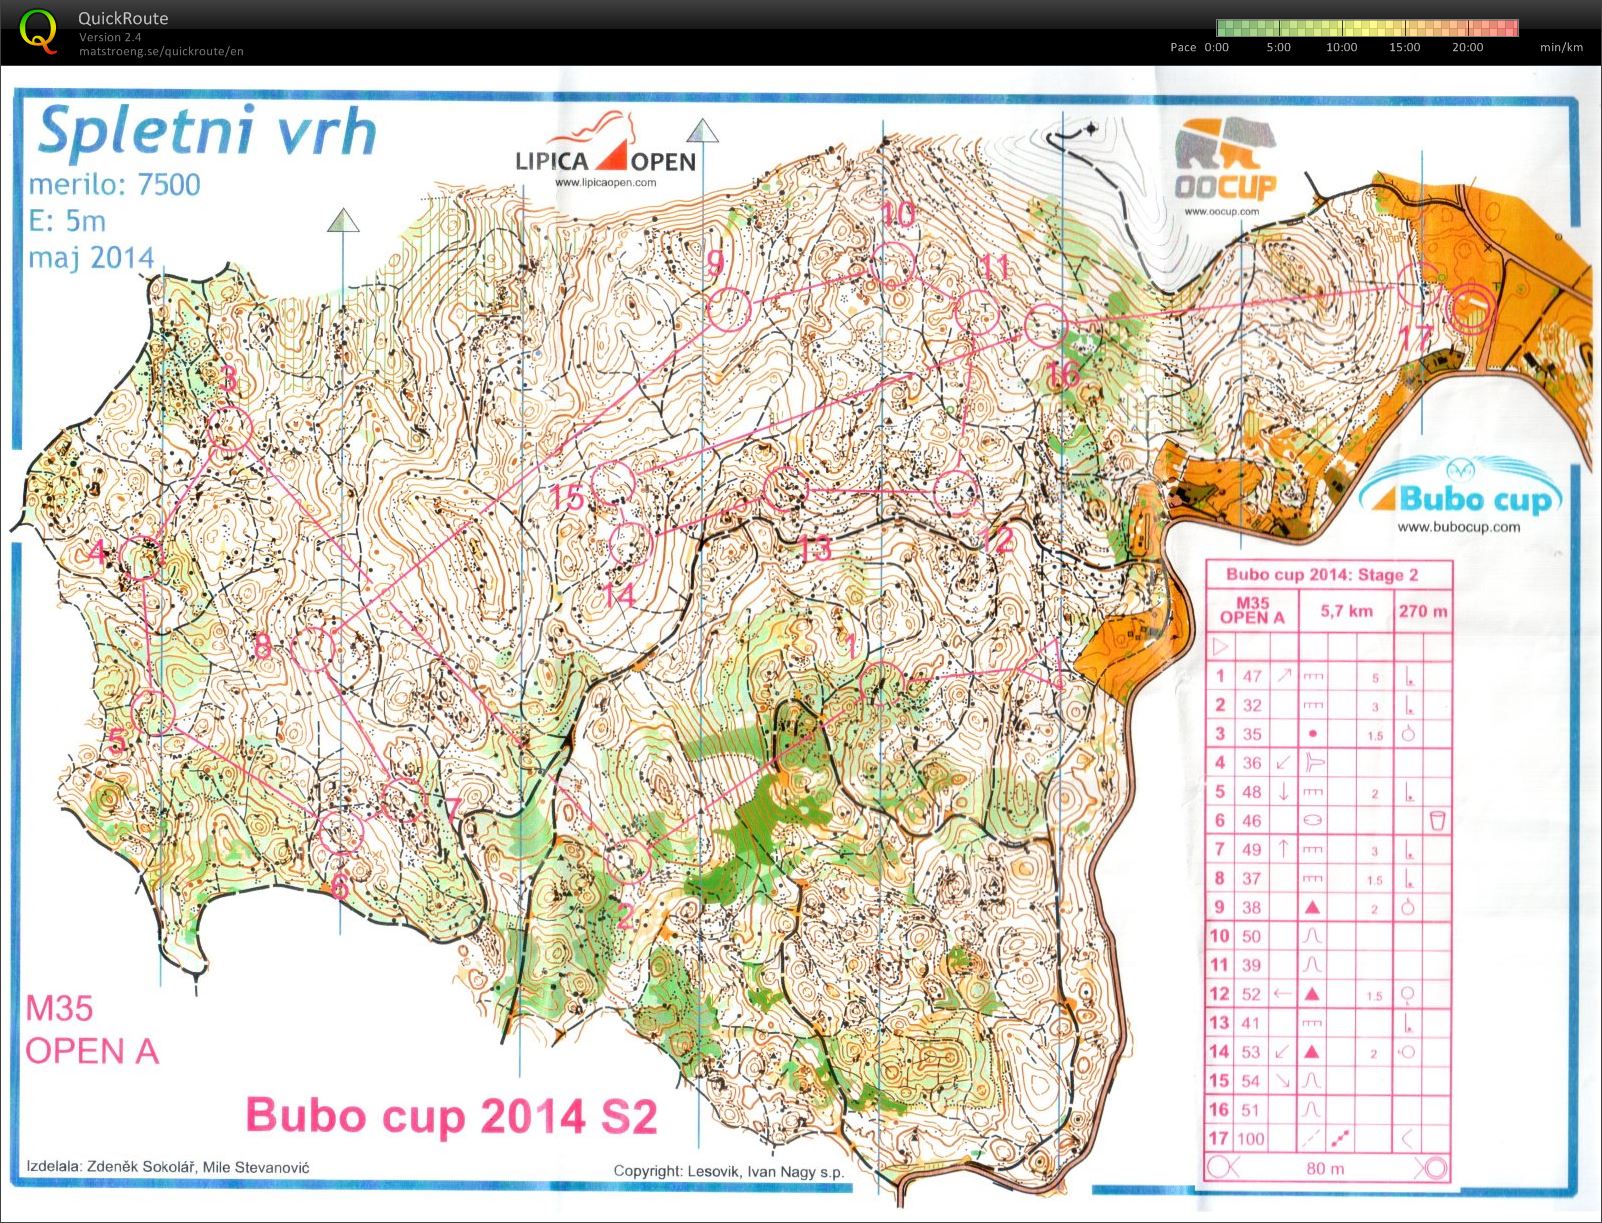 Bubo cup (stage 2) (25/07/2014)